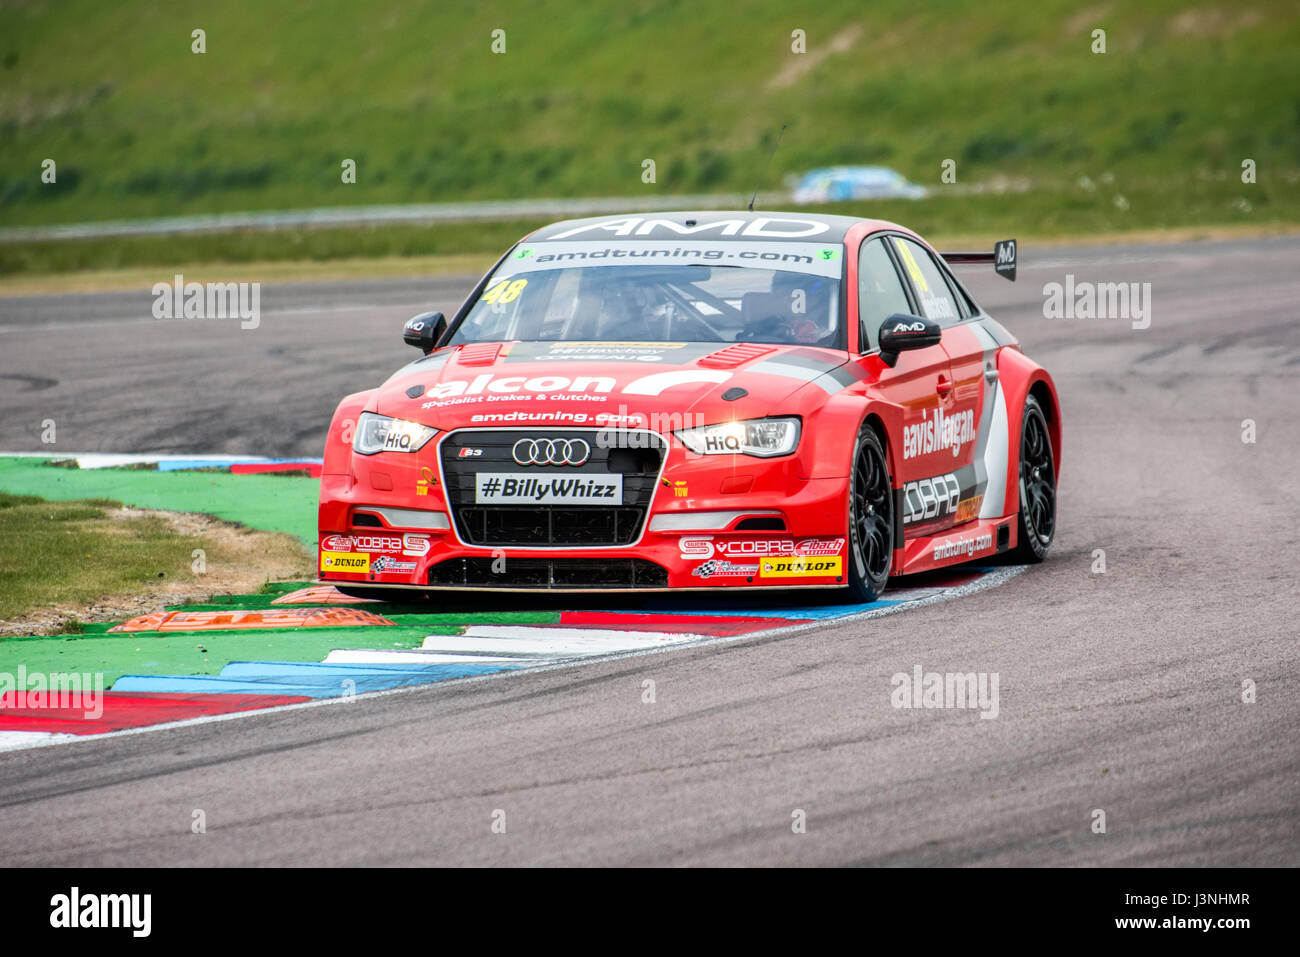 Hampshire, UK. 6th May, 2017. Thruxton Race Circuit and Motorsport Centre, Andover, Hampshire, United Kingdom. 6 May 2016. Ollie Jackson of team AmDtuning.com with Cobra Exhausts in his Audi S3 Qualifying at Dunlop MSA British Touring Car Championship. All cars race today with the #BillyWhizz number plates and livery in support of Billy Monger who suffered life changing injuries at Donington Park a few weeks ago during an F4 (Formula 4) British Championship Race. © Will Bailey / Alamy Live News Stock Photo